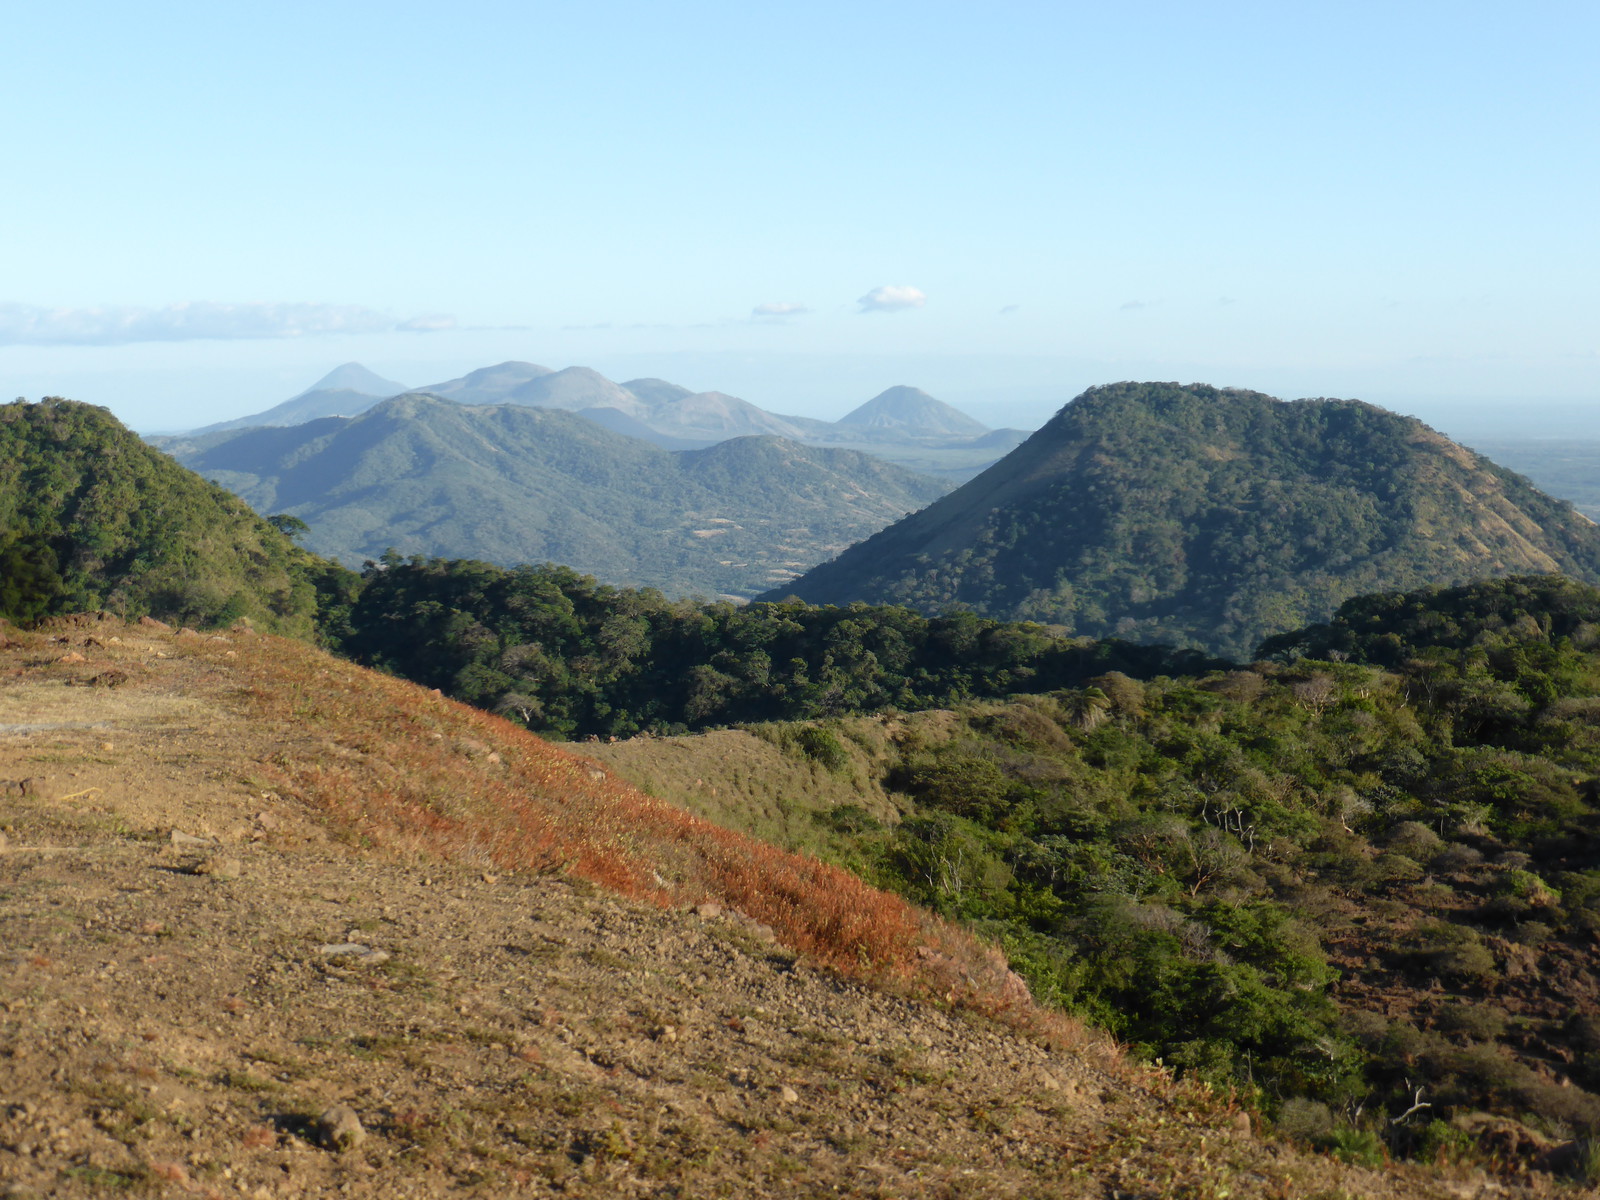 The view east along the Maribios chain of volcanoes